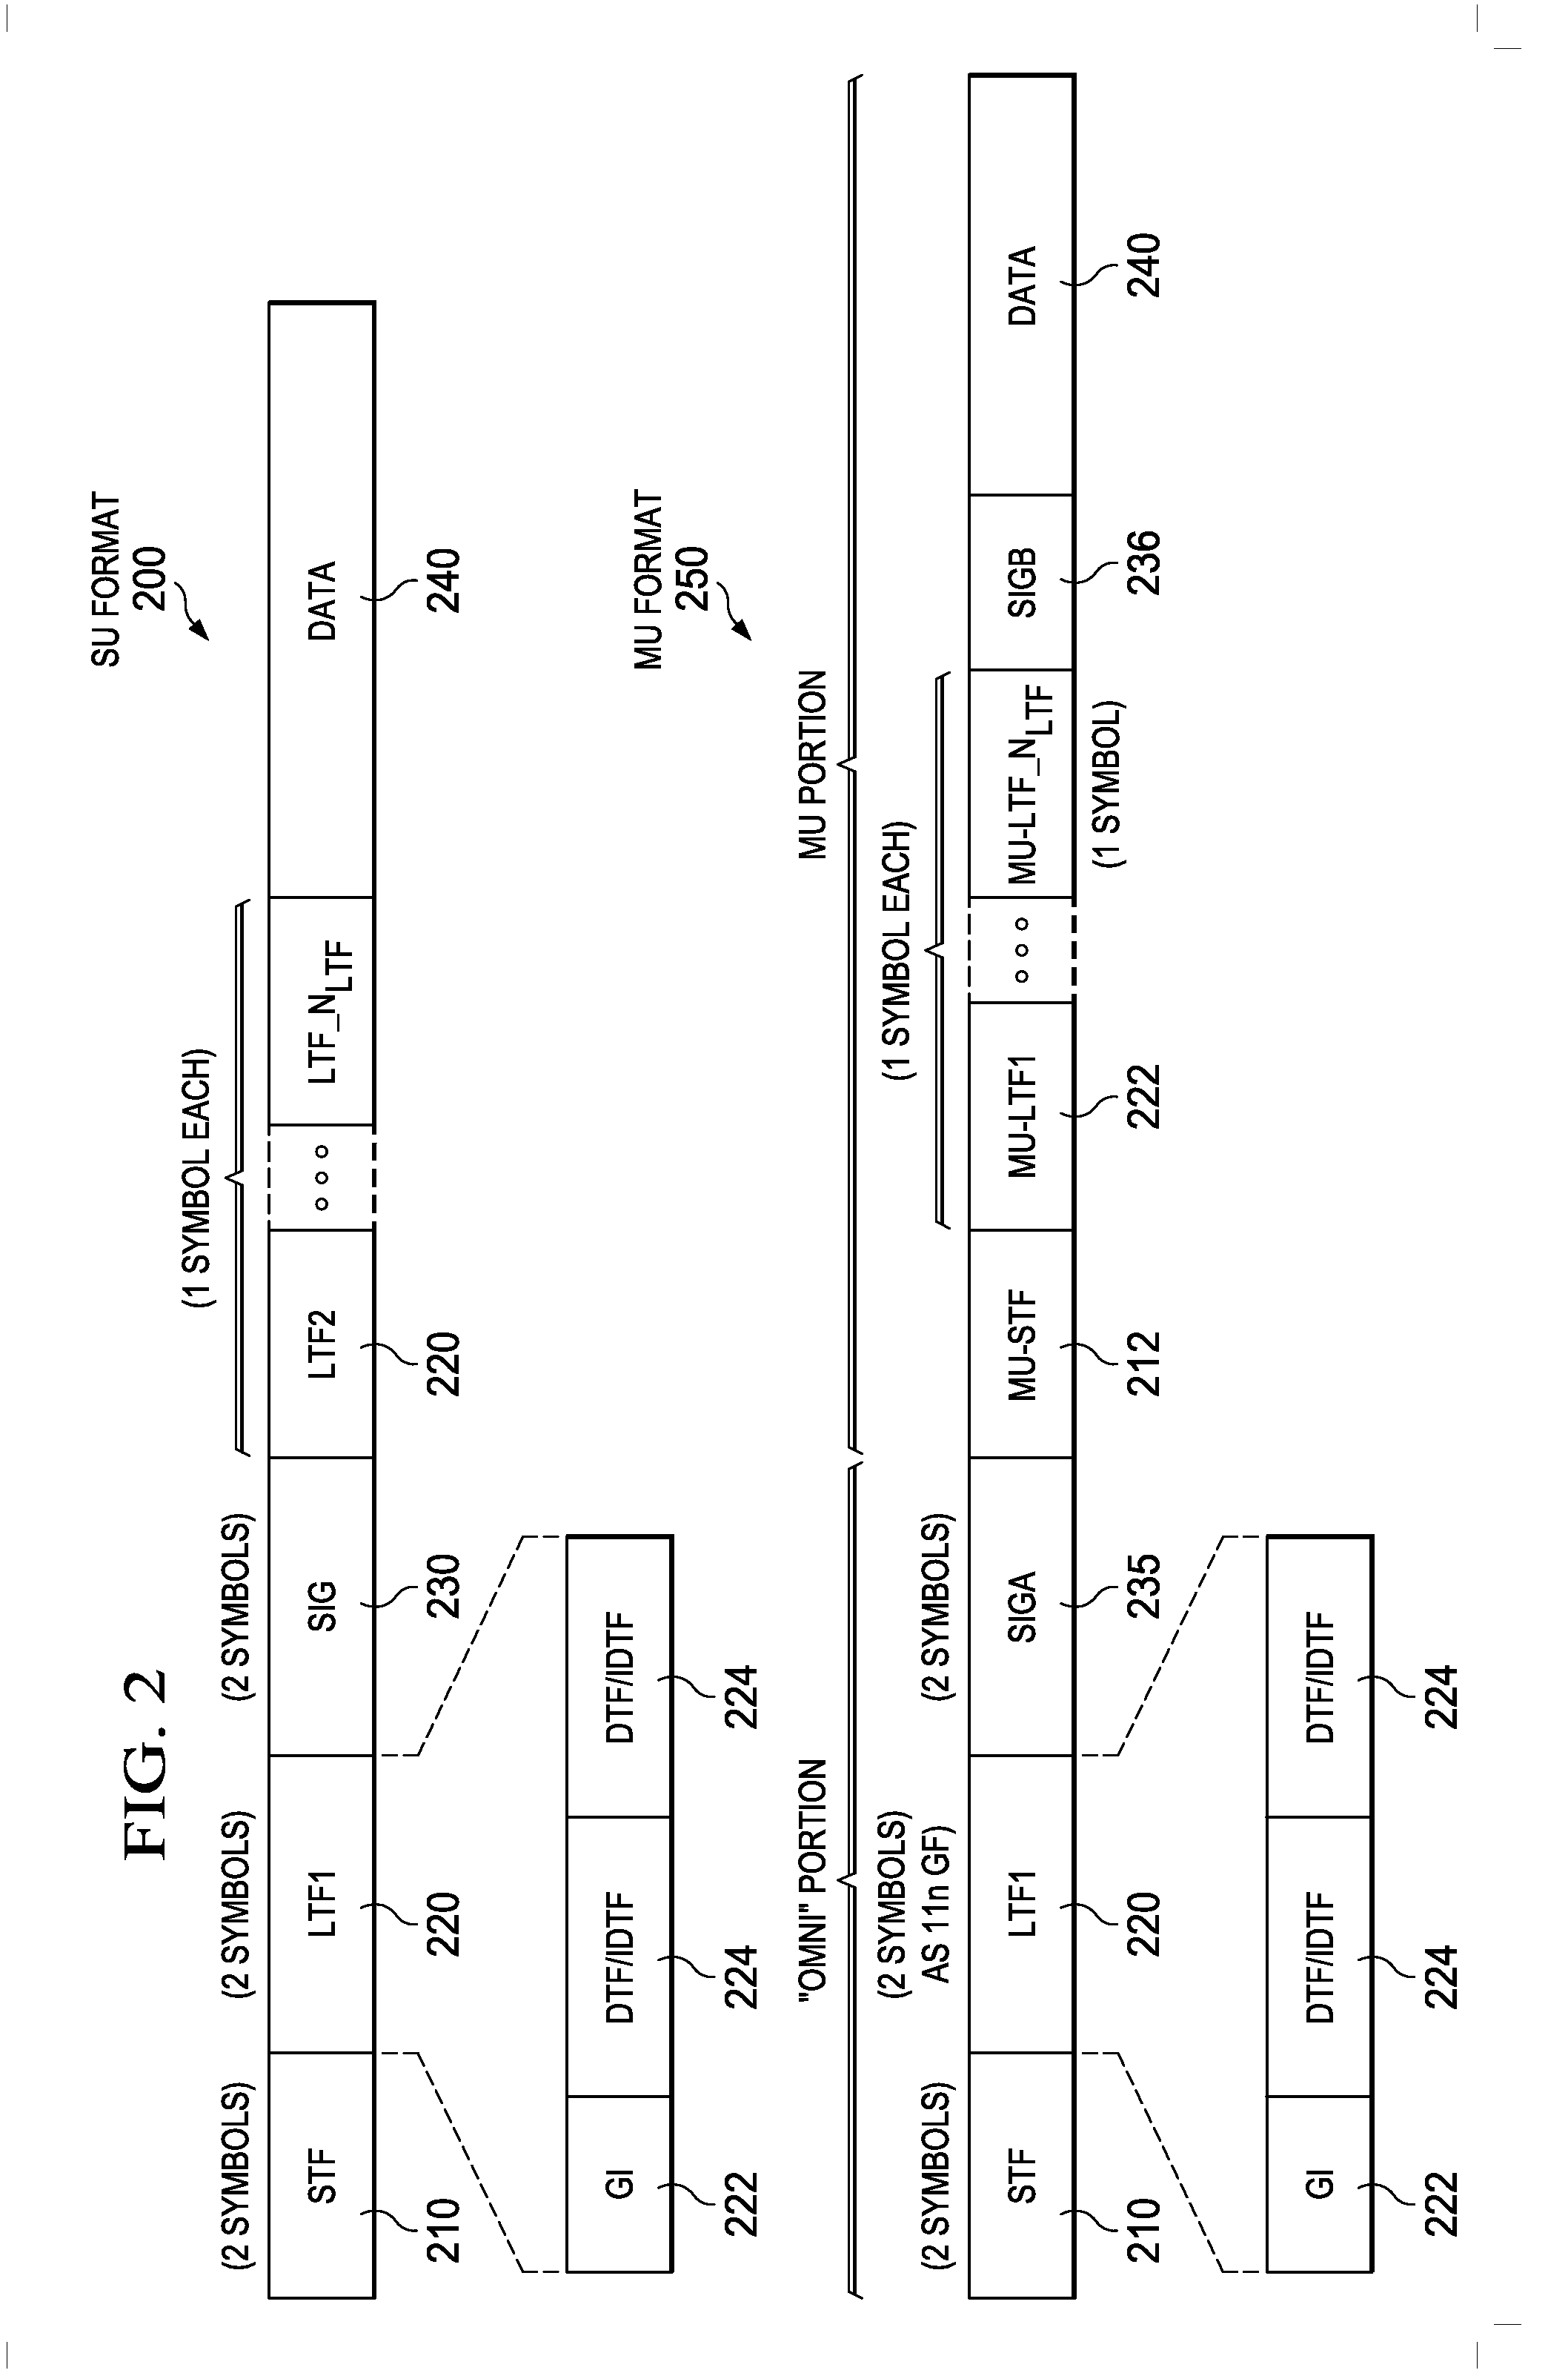 System and Method for Traffic Signaling and Control in a Wireless Network